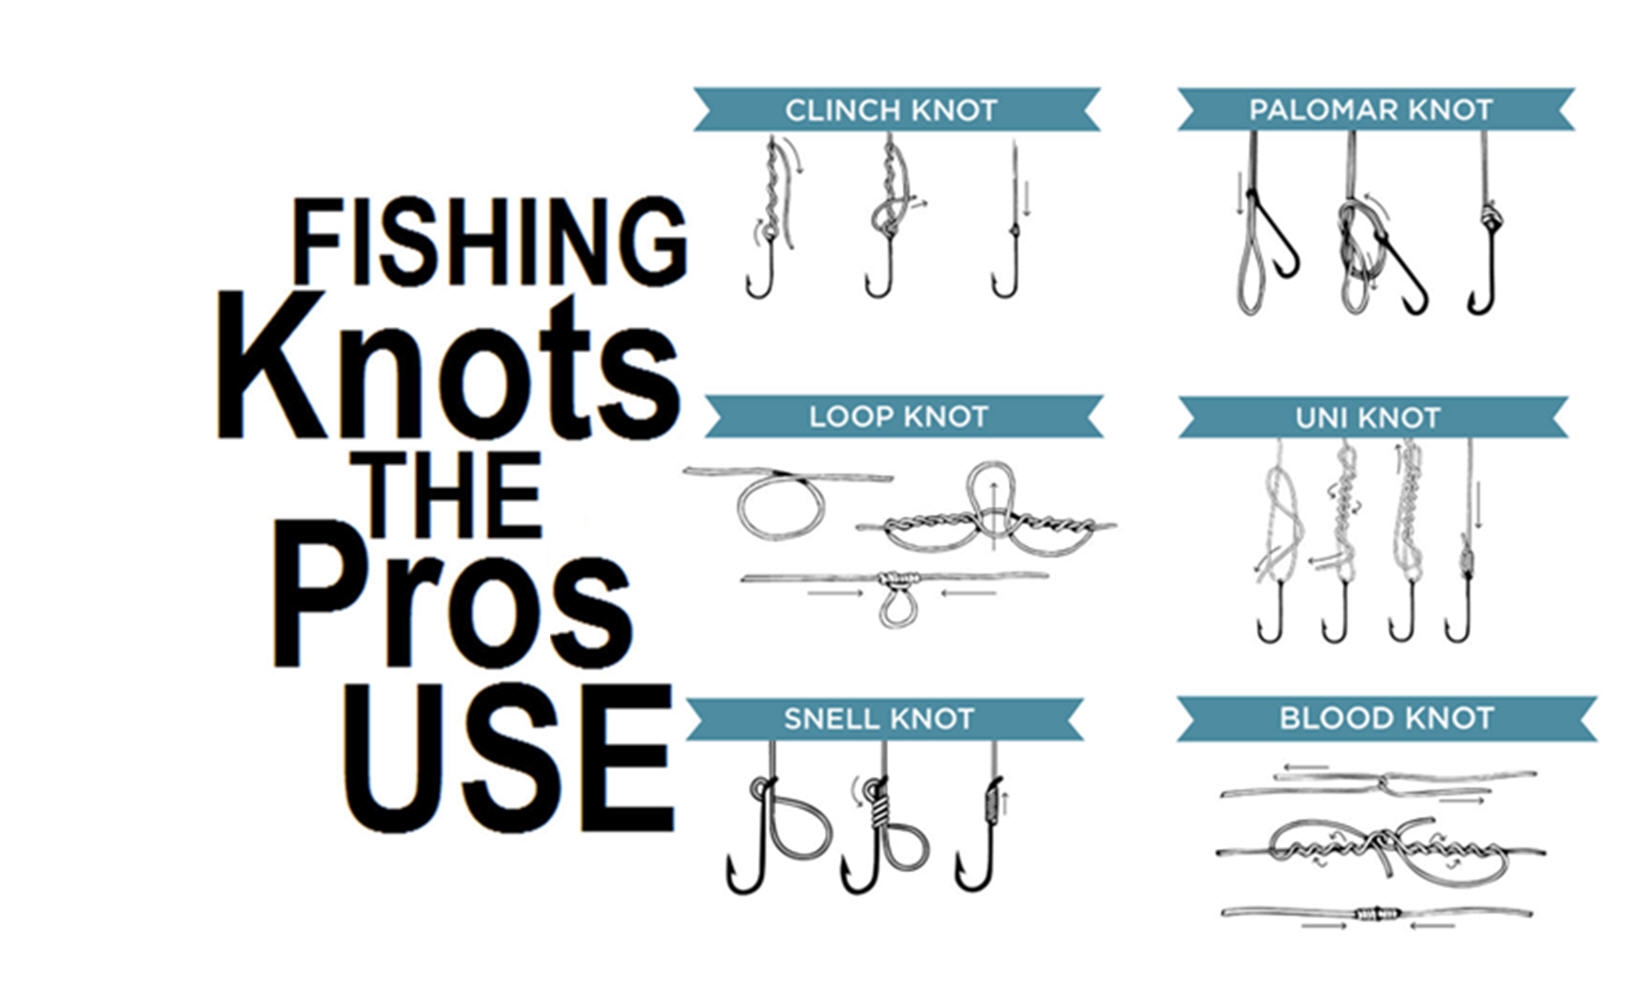 LM) So what is your go to fishing knot? I prefer the Palomar Knot